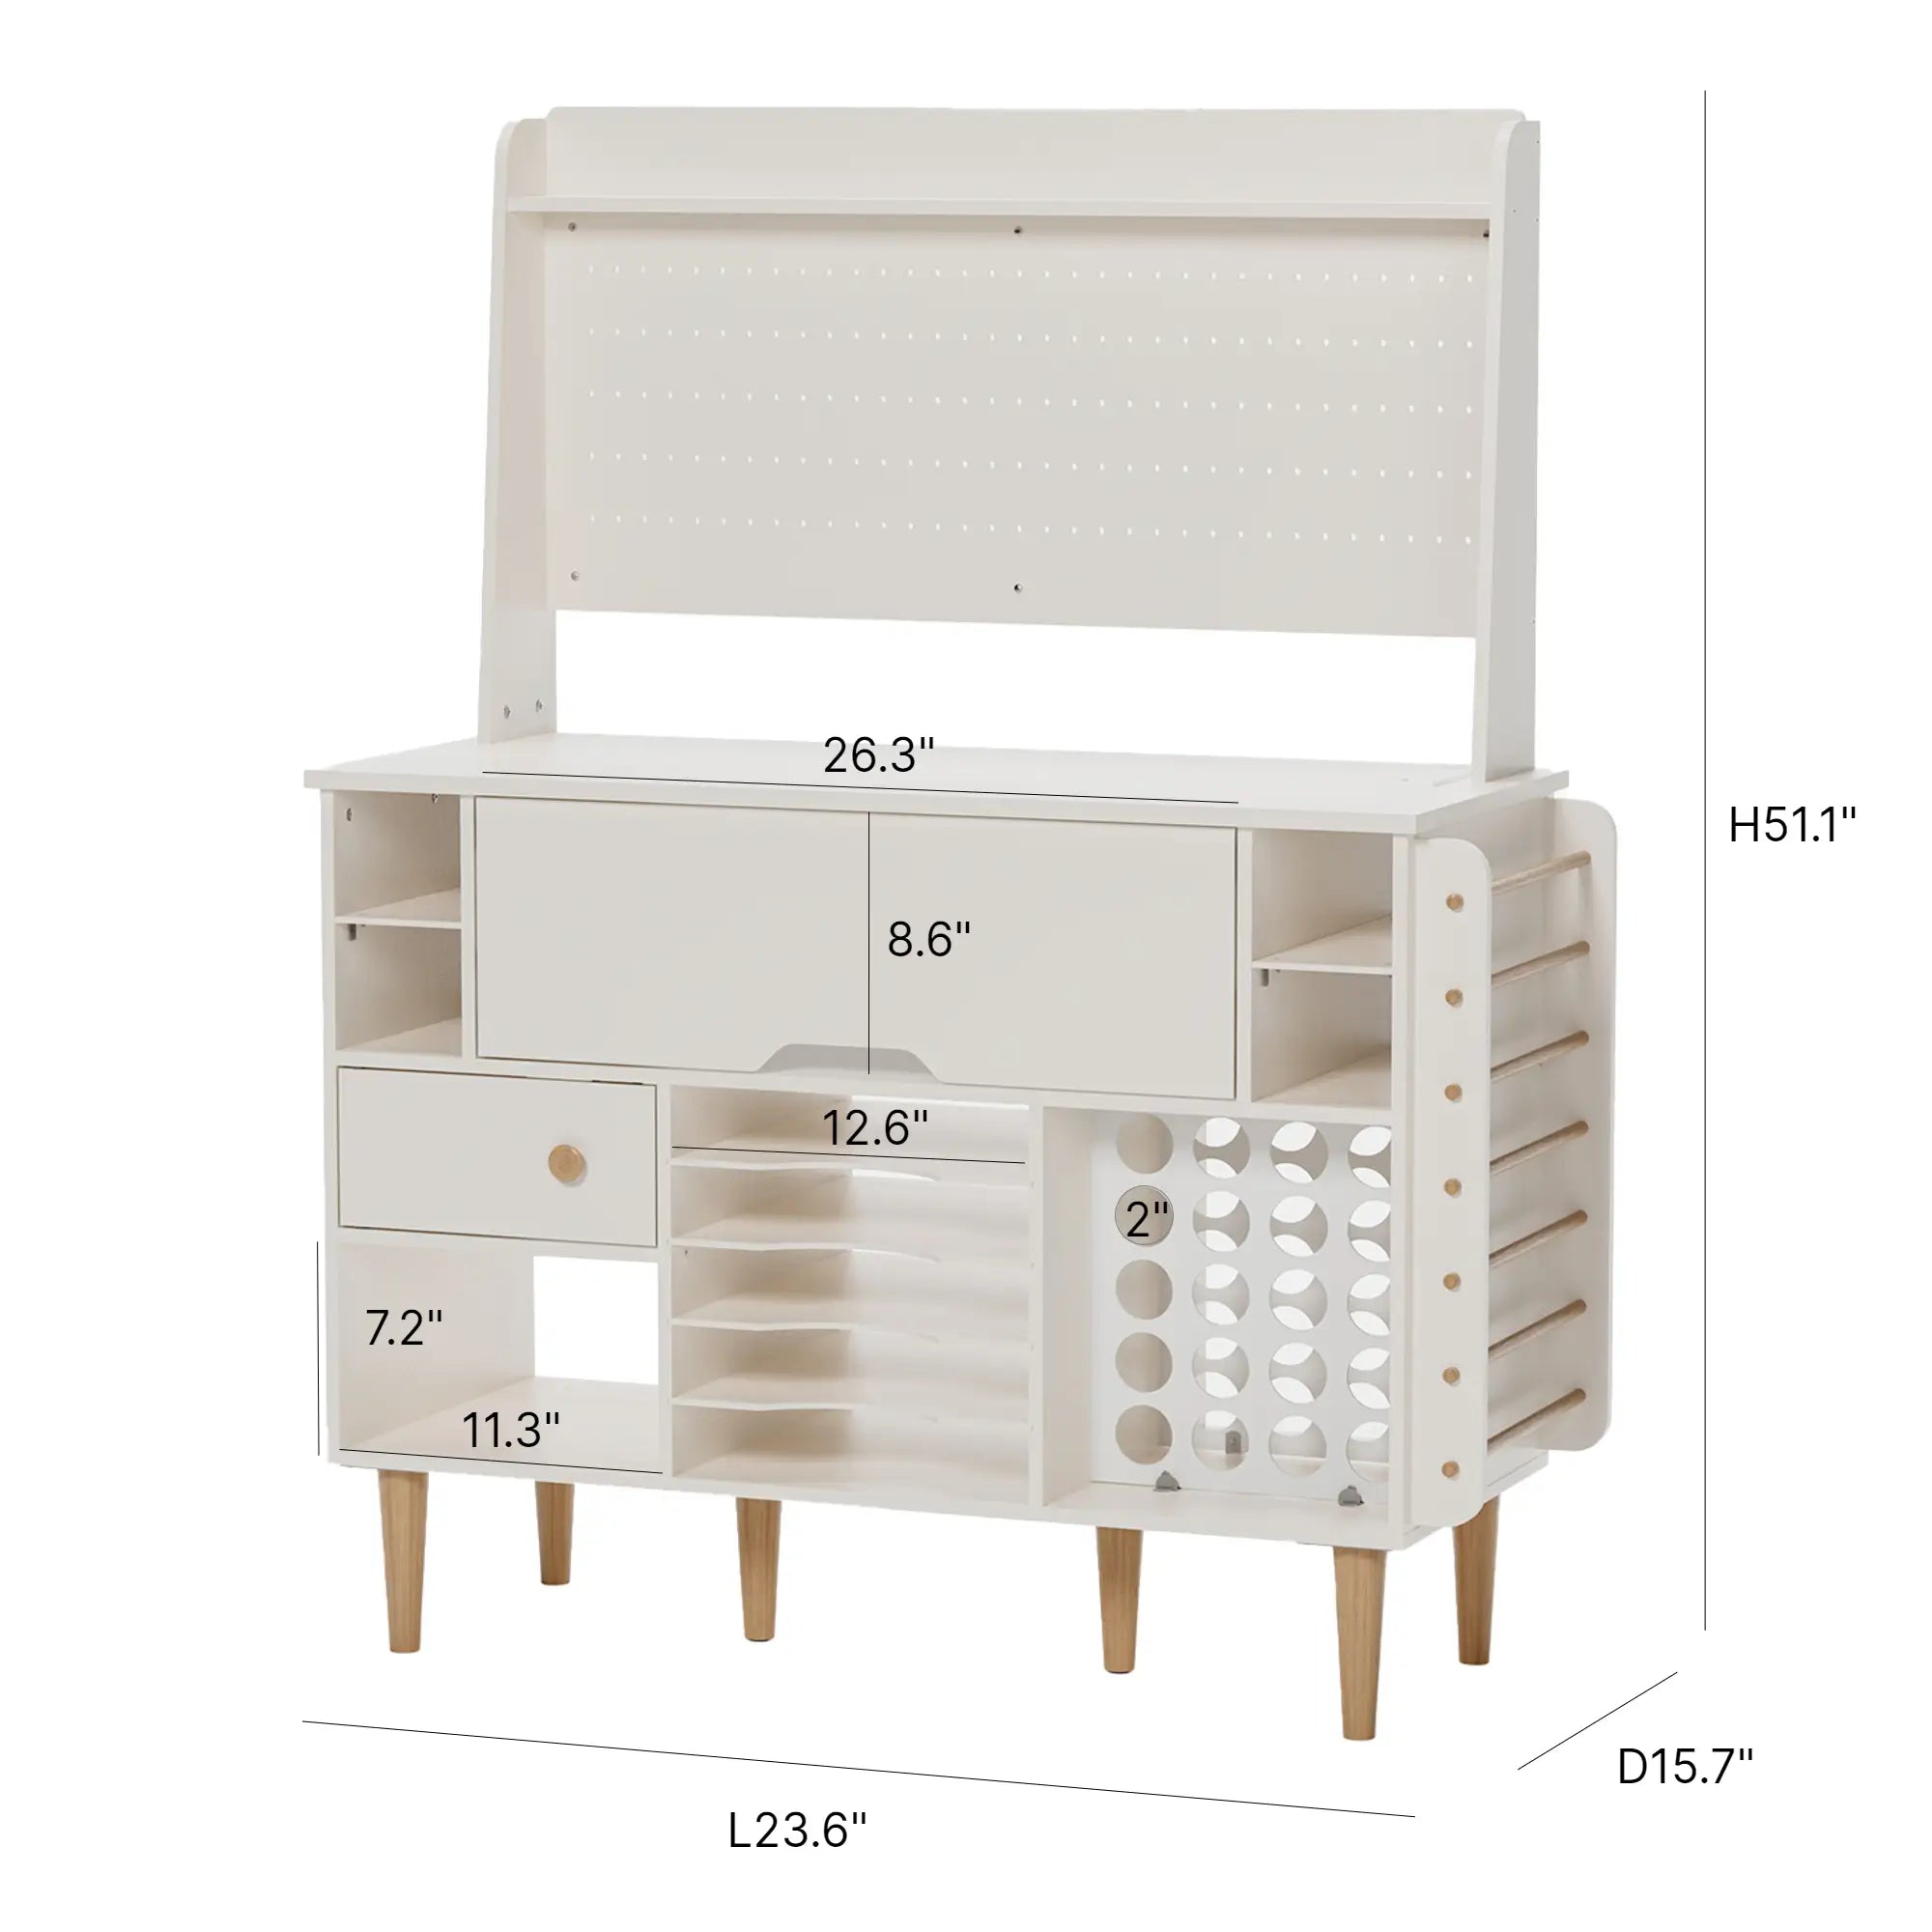 Crafit Folding Craft Storage Cabinet with Pegboard for Cricut